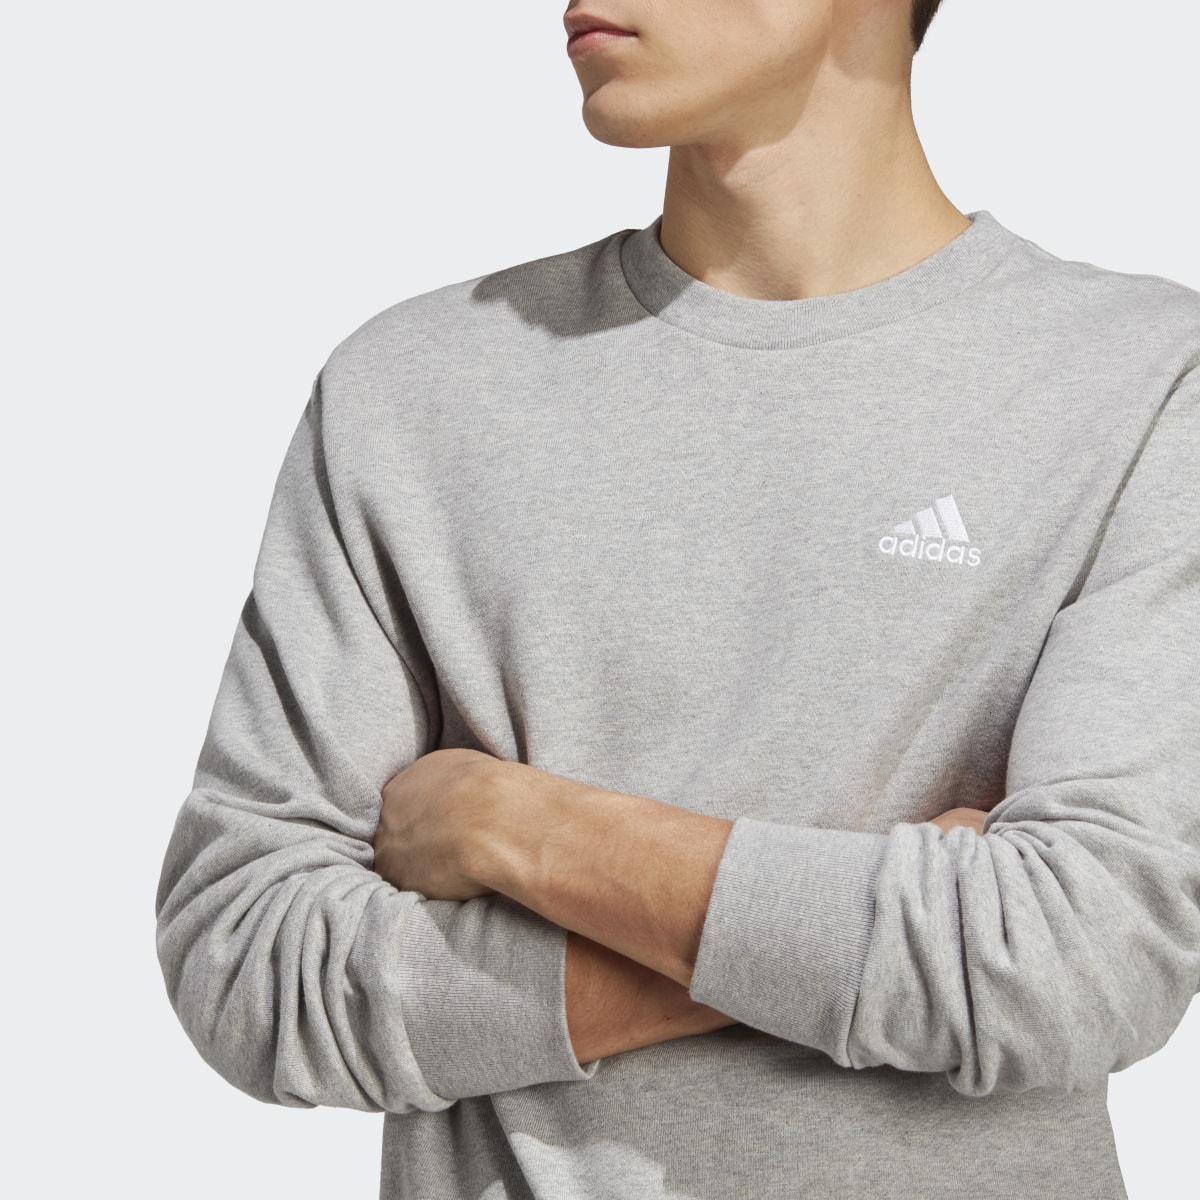 Adidas Essentials French Terry Embroidered Small Logo Sweatshirt. 6